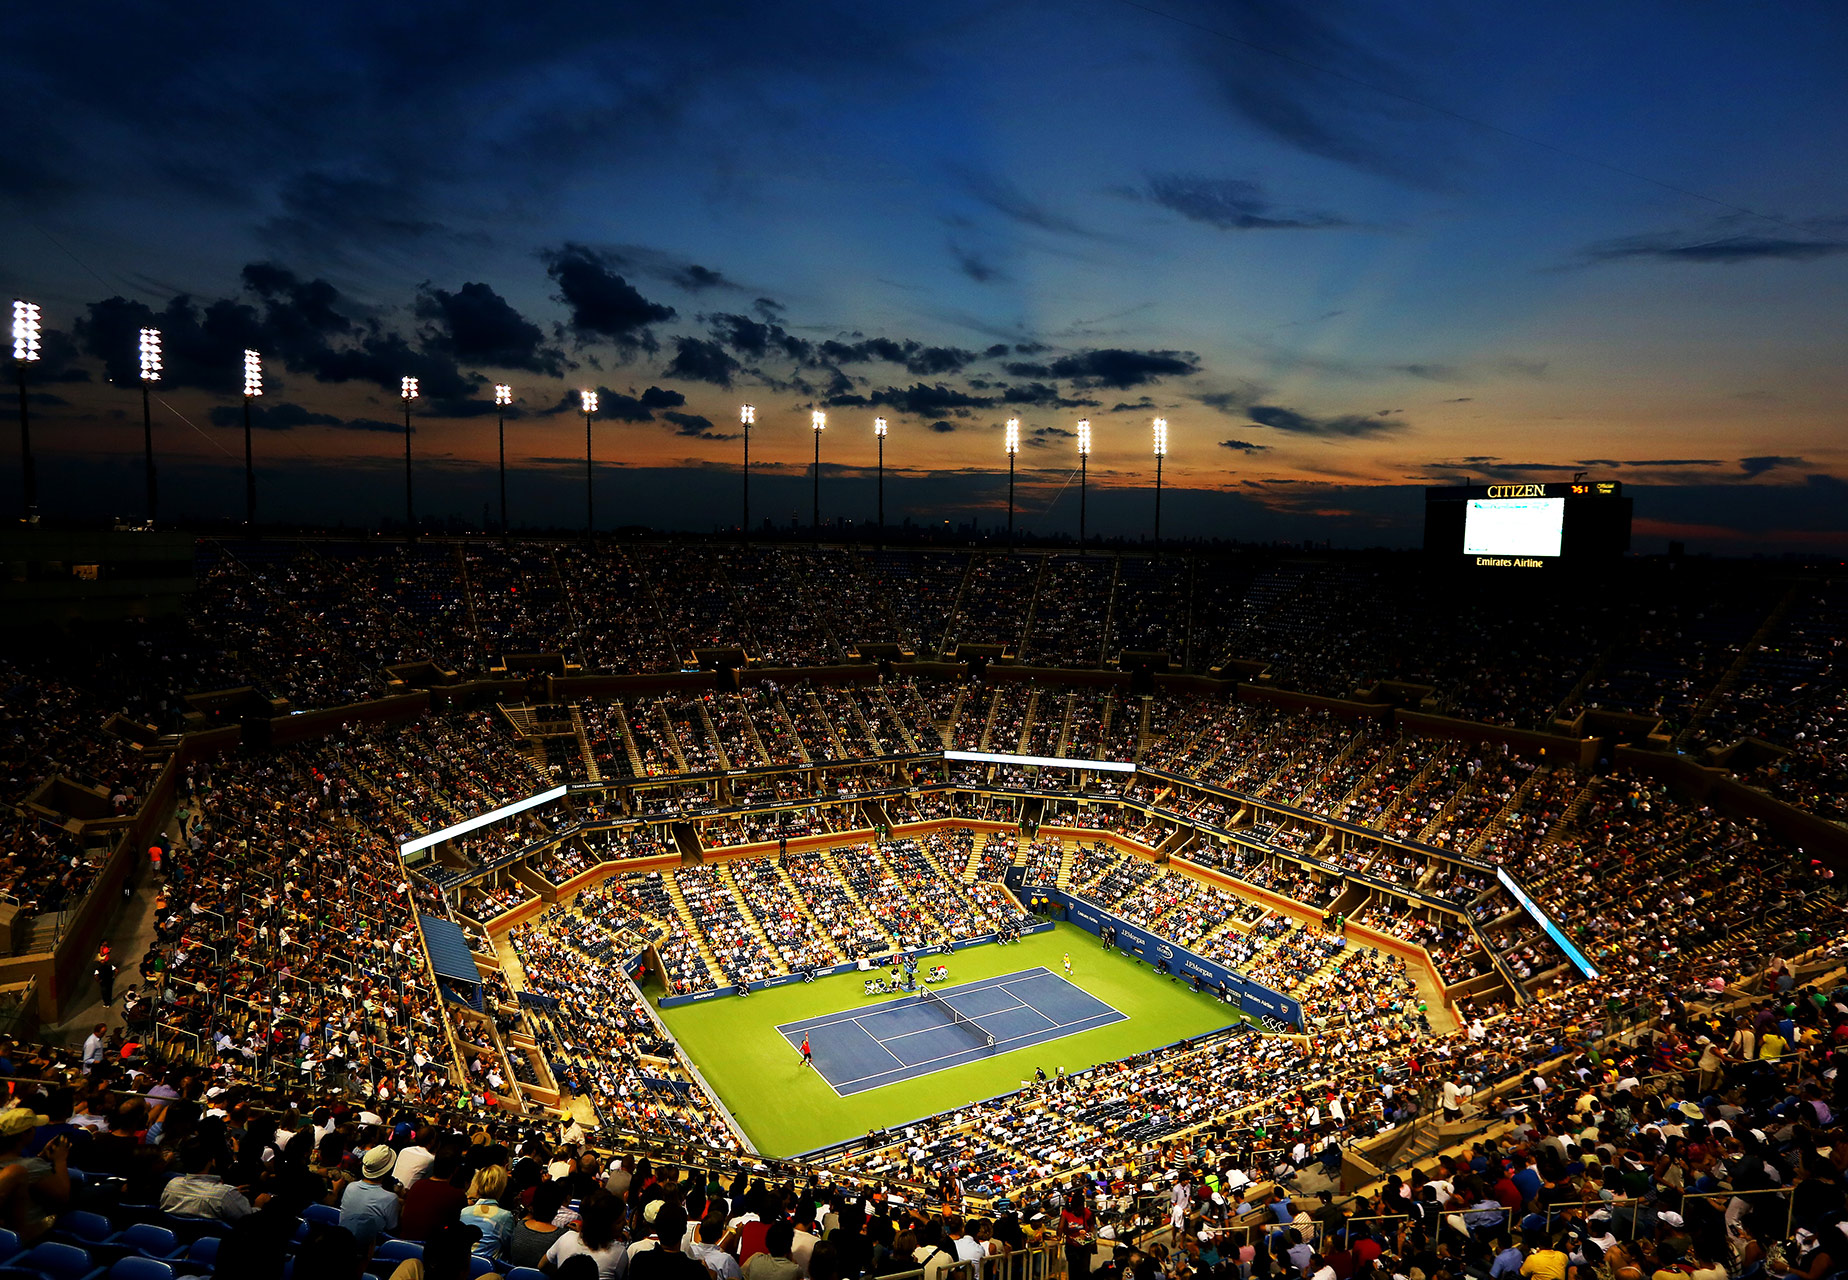 US Open-US Open Tennis Championship: Session 14 - Men's/Women's Round of 16 tickets price and order